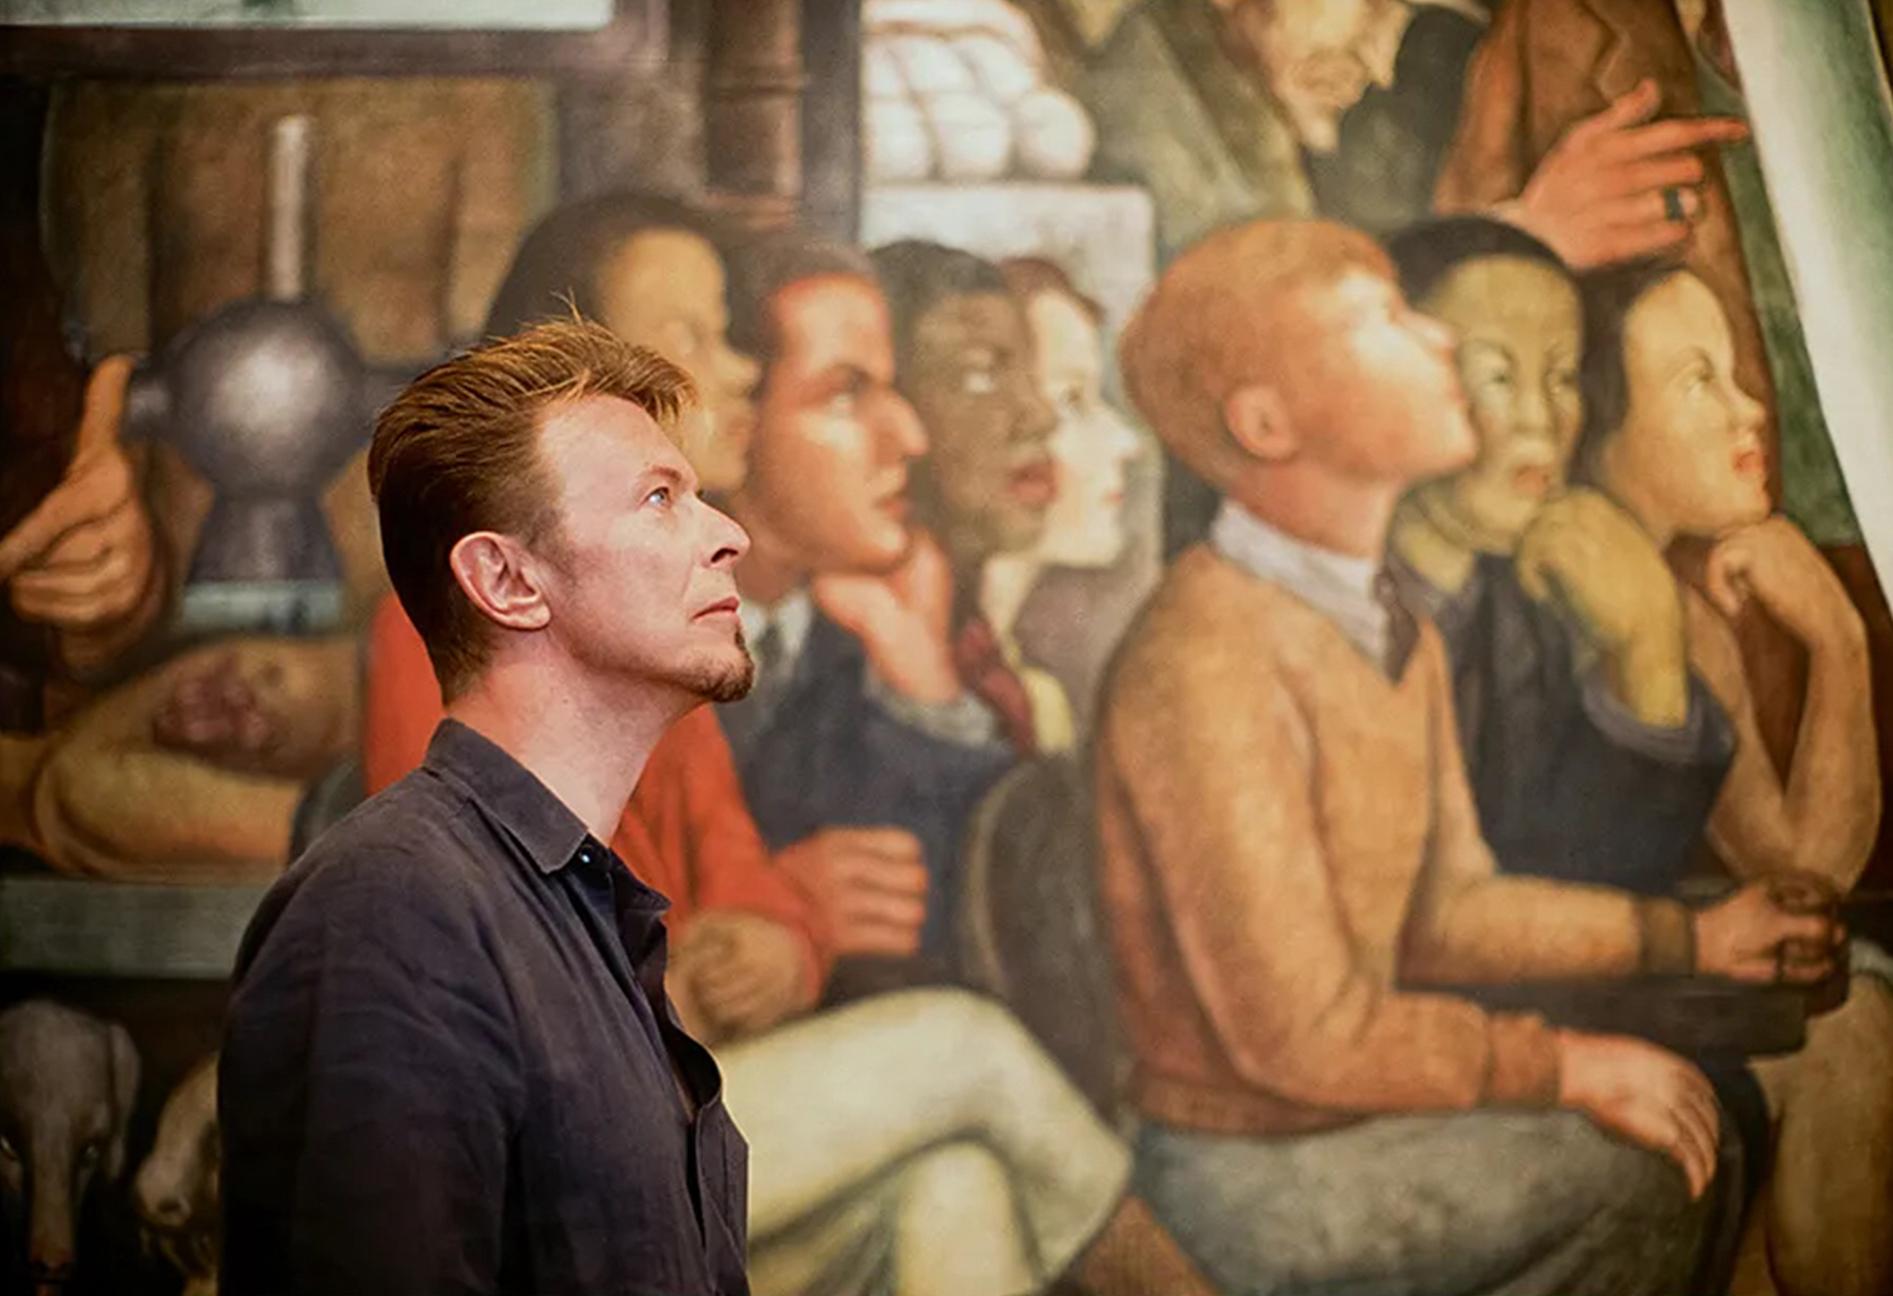 David Bowie at a Diego Rivera mural 1997